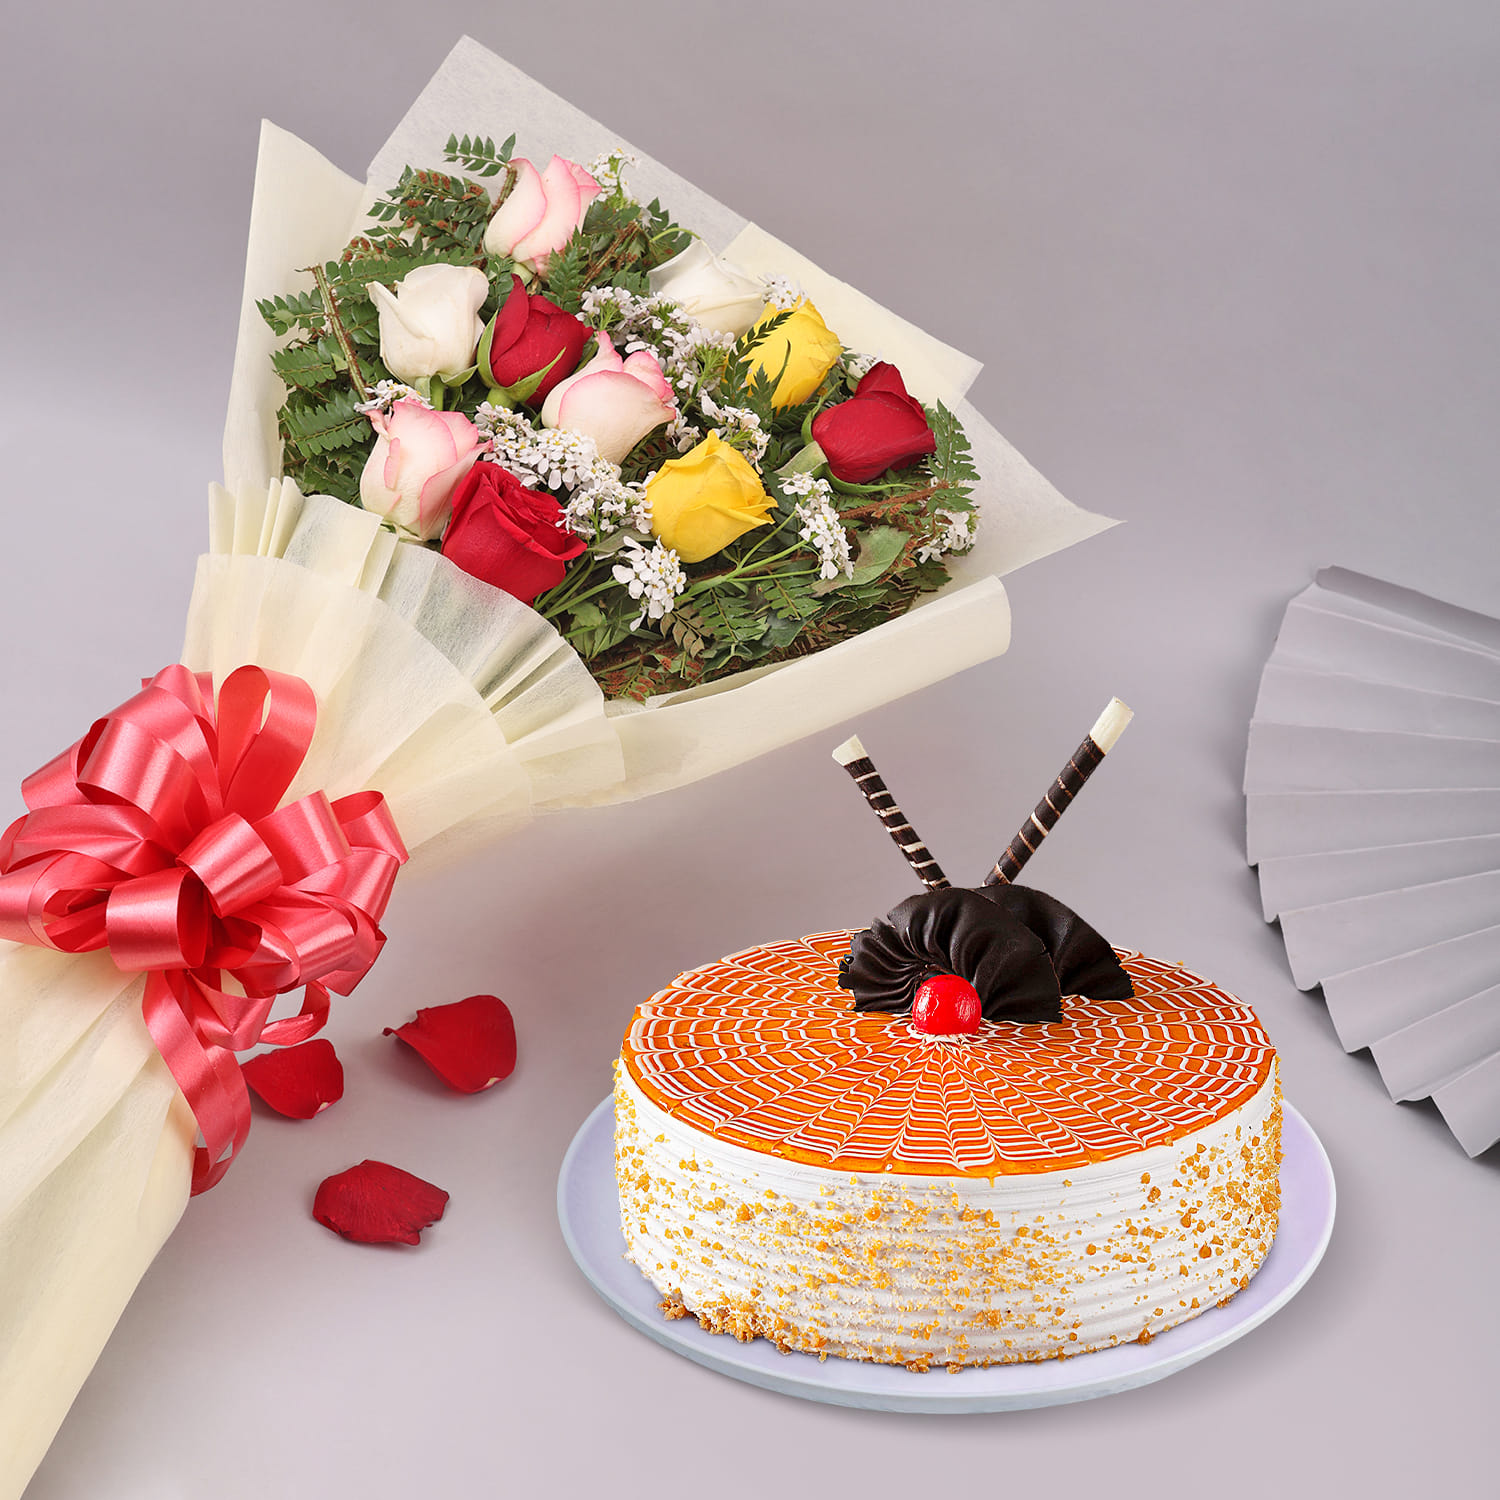 Send Flowers to Kochi with ① FloraZone | Same Day & Midnight Flower Delivery  in Kochi | Online Florist - Flora Zone